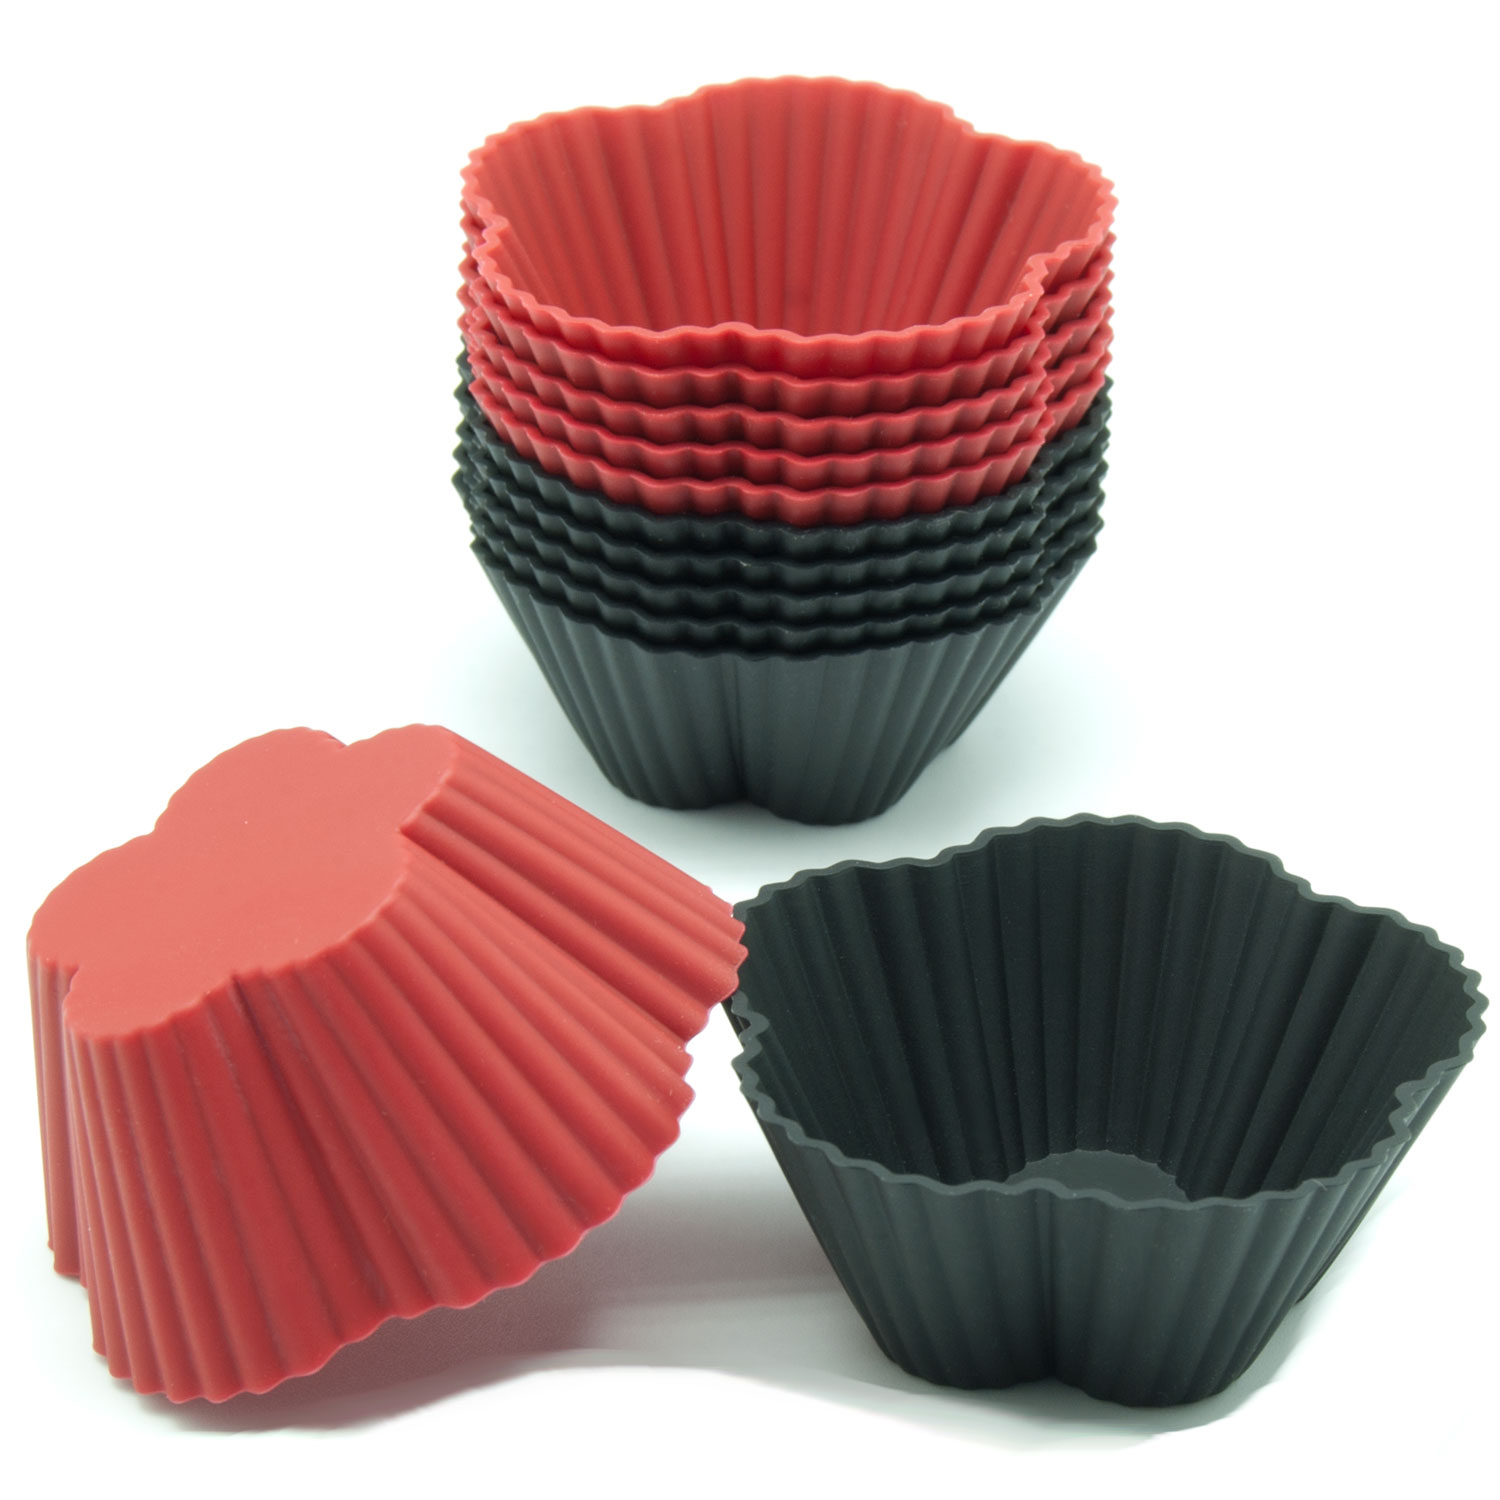 Freshware Silicone Cupcake Liners / Baking Cups - 12-Pack Muffin Molds, 2-3/8 inch Cherry, Red and Black Colors